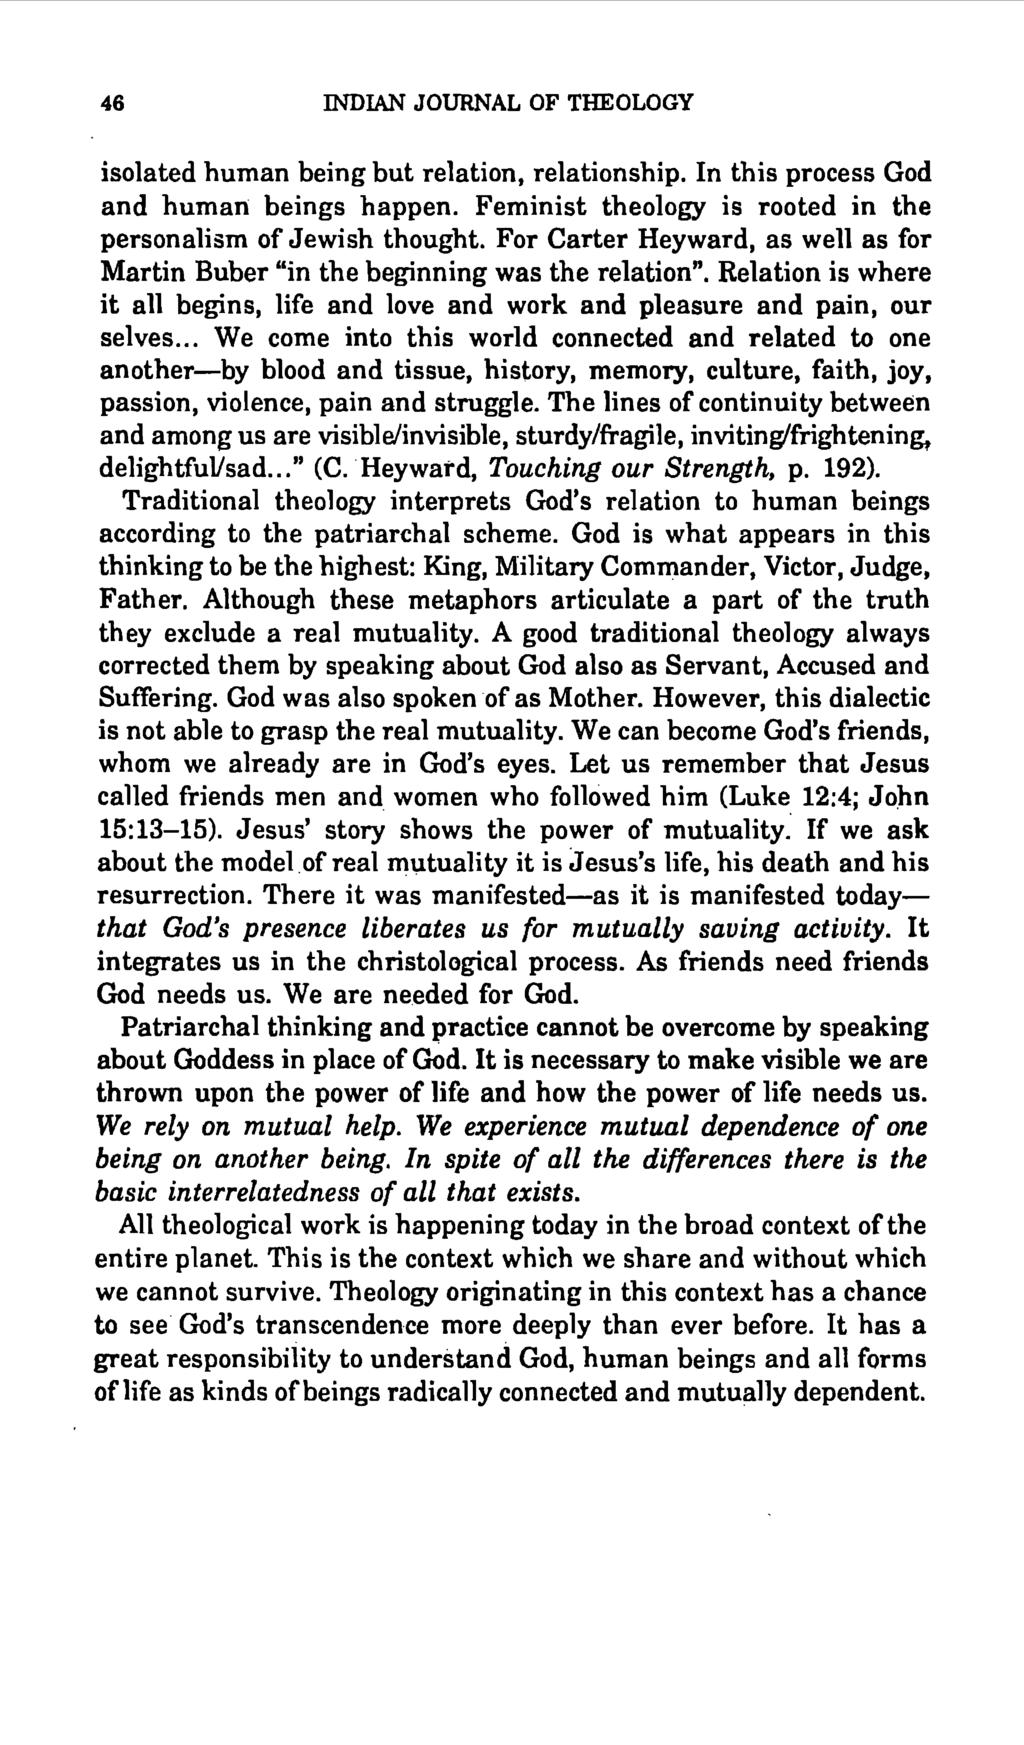 46 INDIAN JOURNAL OF THEOLOGY isolated human being but relation, relationship. In this process God and human beings happen. Feminist theology is rooted in the personalism of Jewish thought.